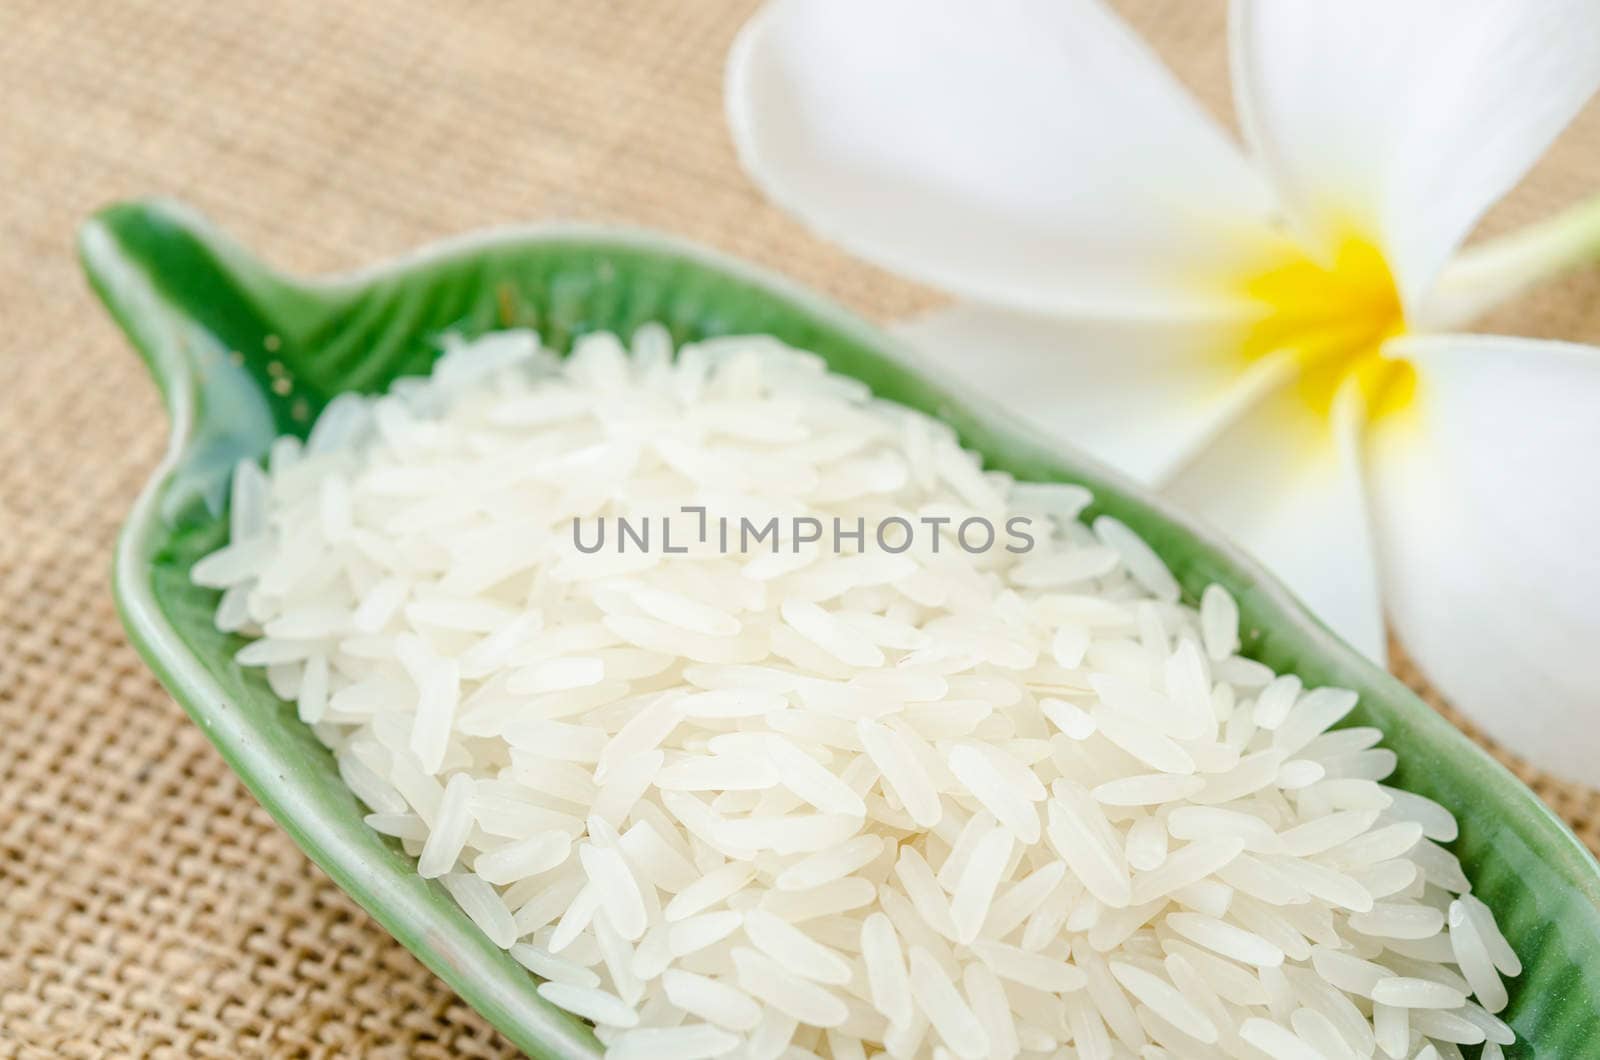 Raw white rice in green cup with flower on sack background.